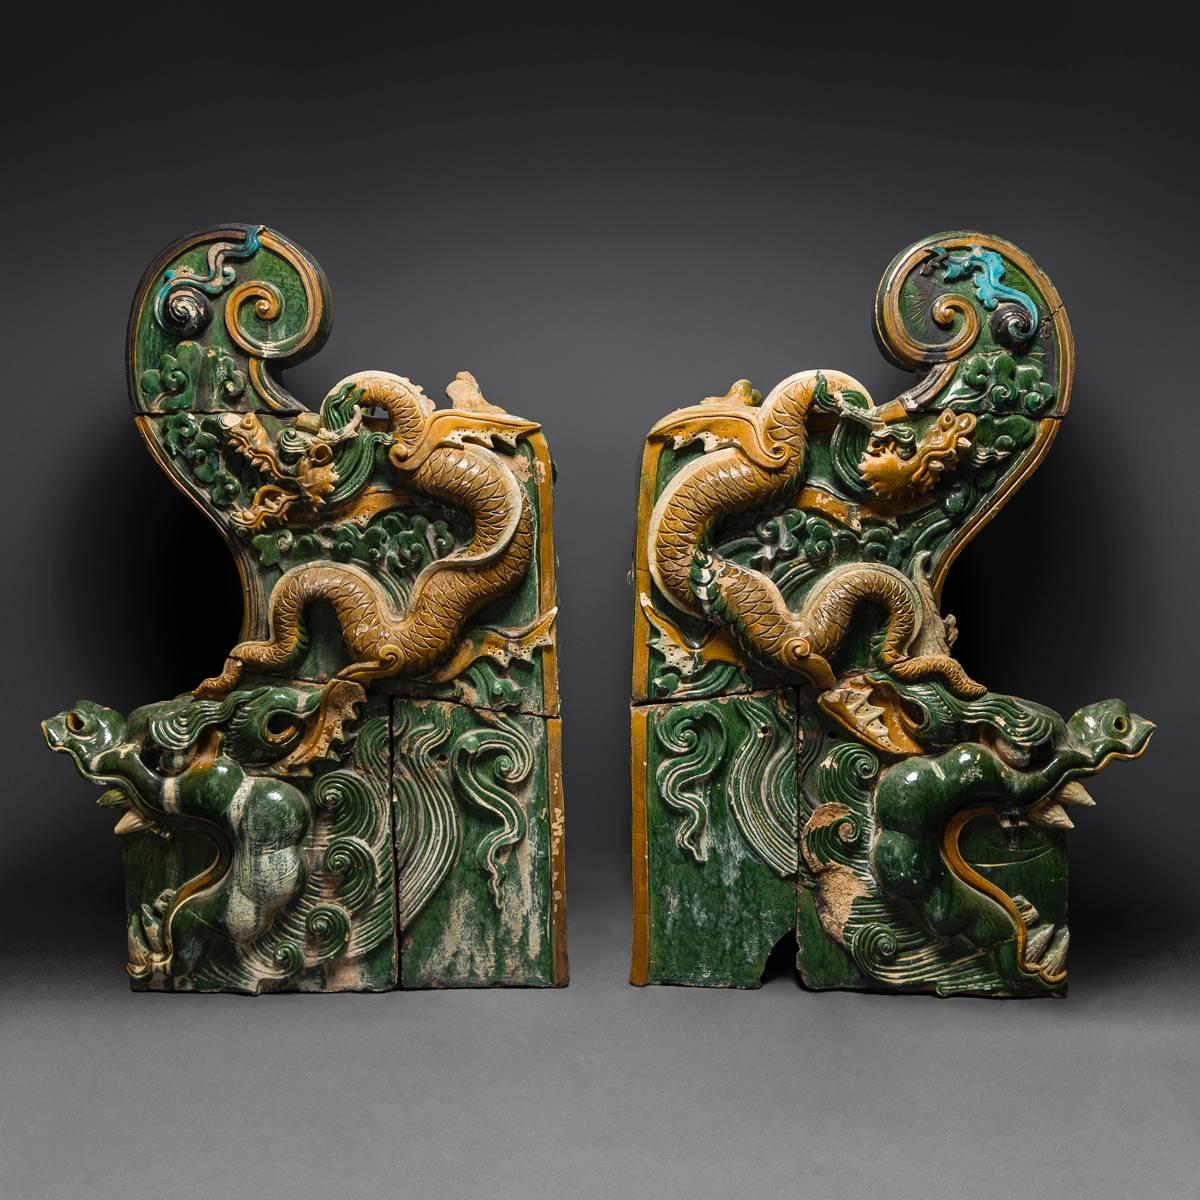 Glazed sculptural tiles are today considered one of the hallmarks of classical Chinese architecture. However, despite their popularity in Modern times, they were relatively scarce until after the end of the Tang Dynasty. Even then, during the Song